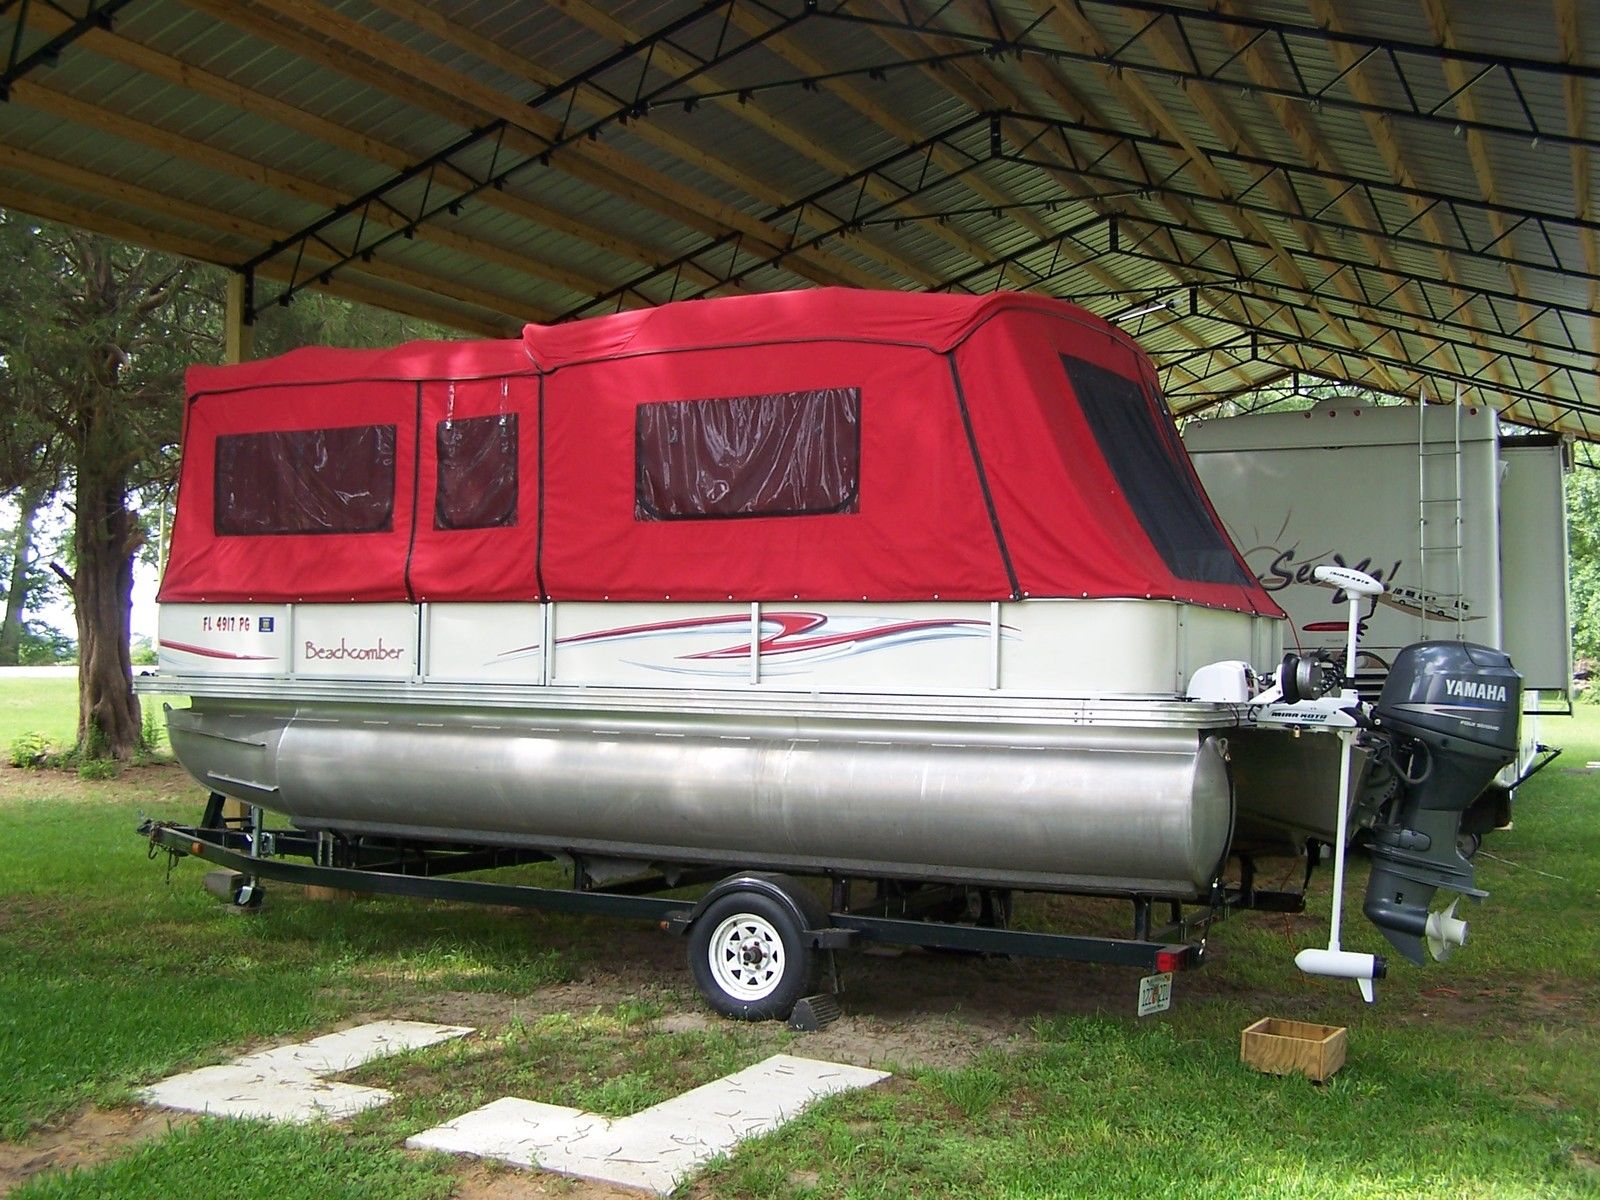 BEACHCOMBER PONTOON BOAT 2006 for sale for $22,900 - Boats 